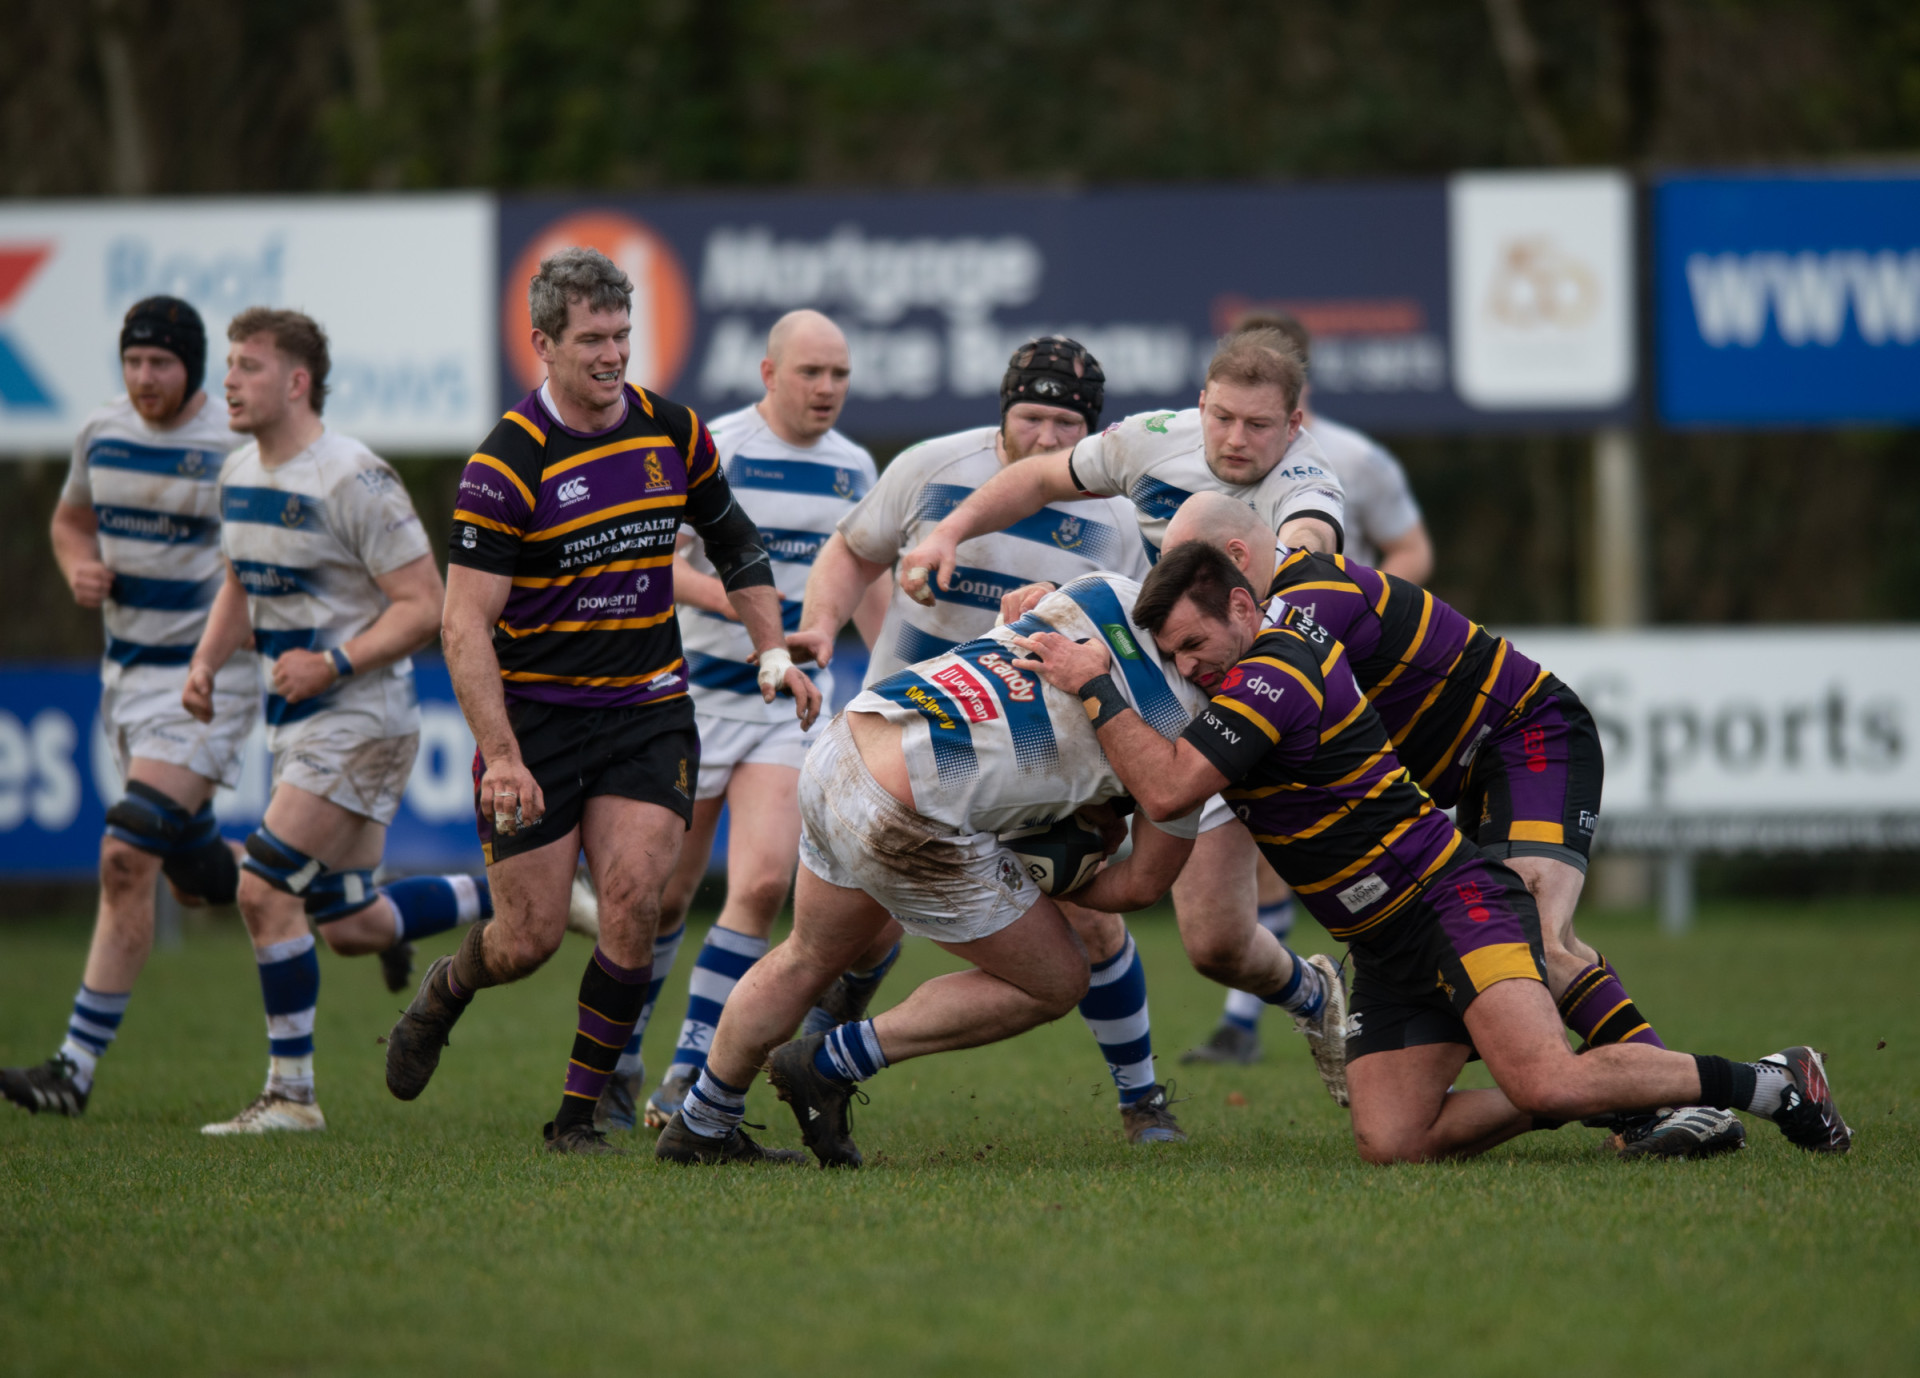 Dungannon run table-topping Instonians close